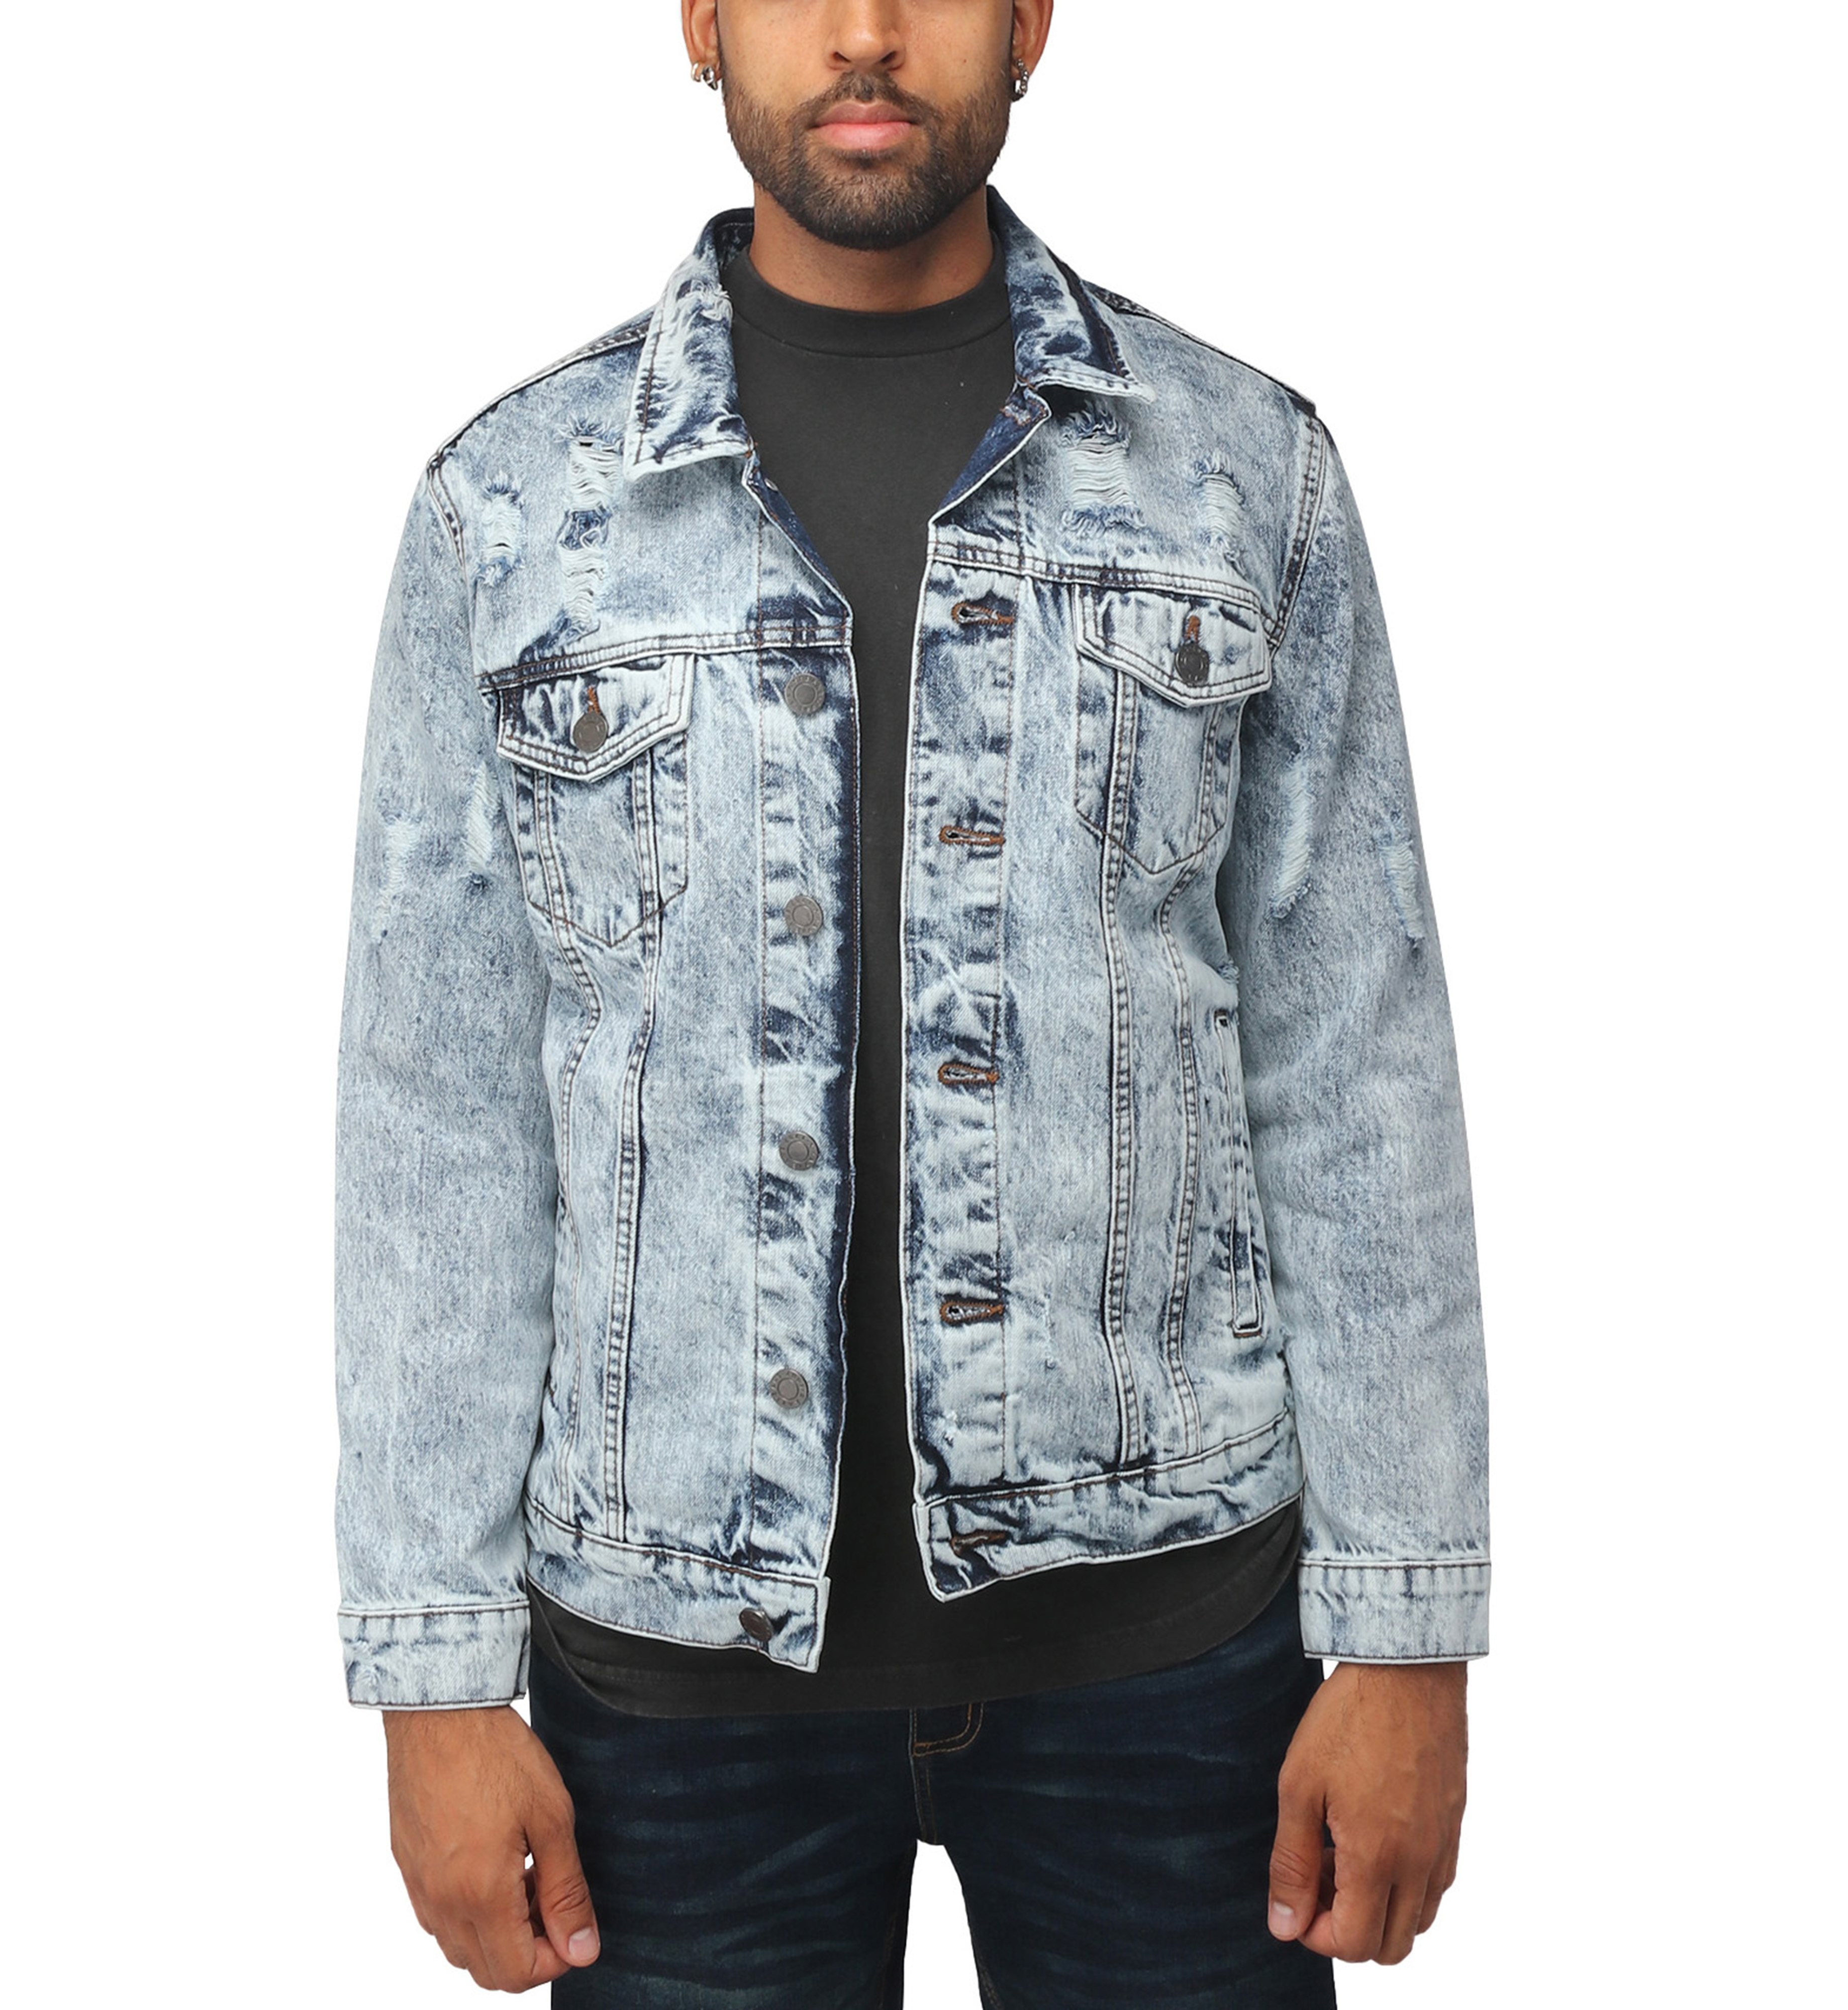 X RAY Men's Denim Jacket, Washed Ripped Distressed Flex Stretch Casual Trucker Biker Jean Jacket, Acid Blue - Ripped, Small - image 1 of 9